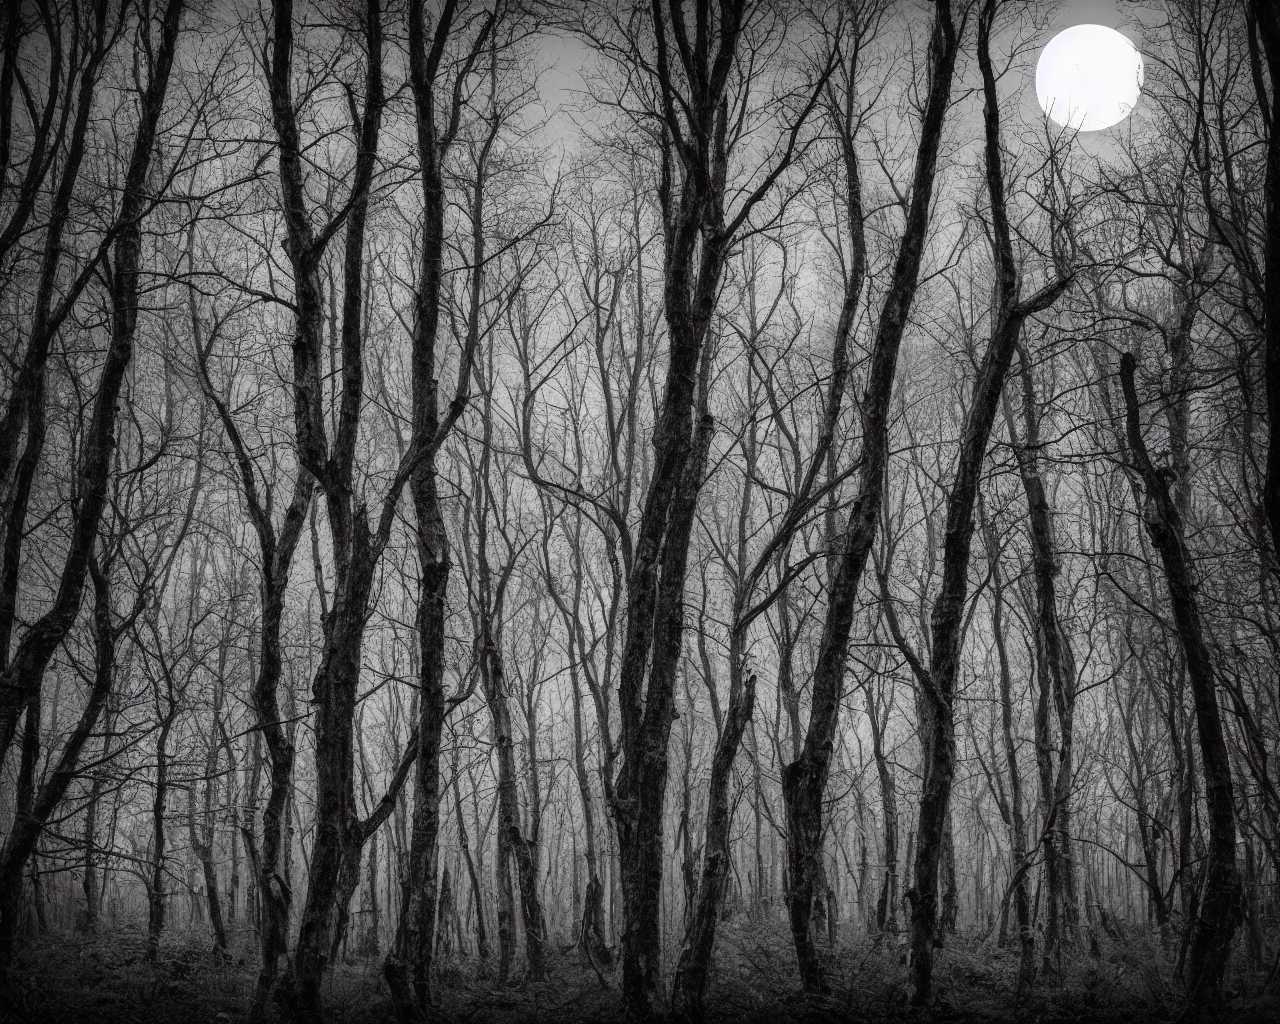 00020-8-nikon_d8102C_spooky_haunted_forest_at_night_under_a_full_moon2C_ghost.png